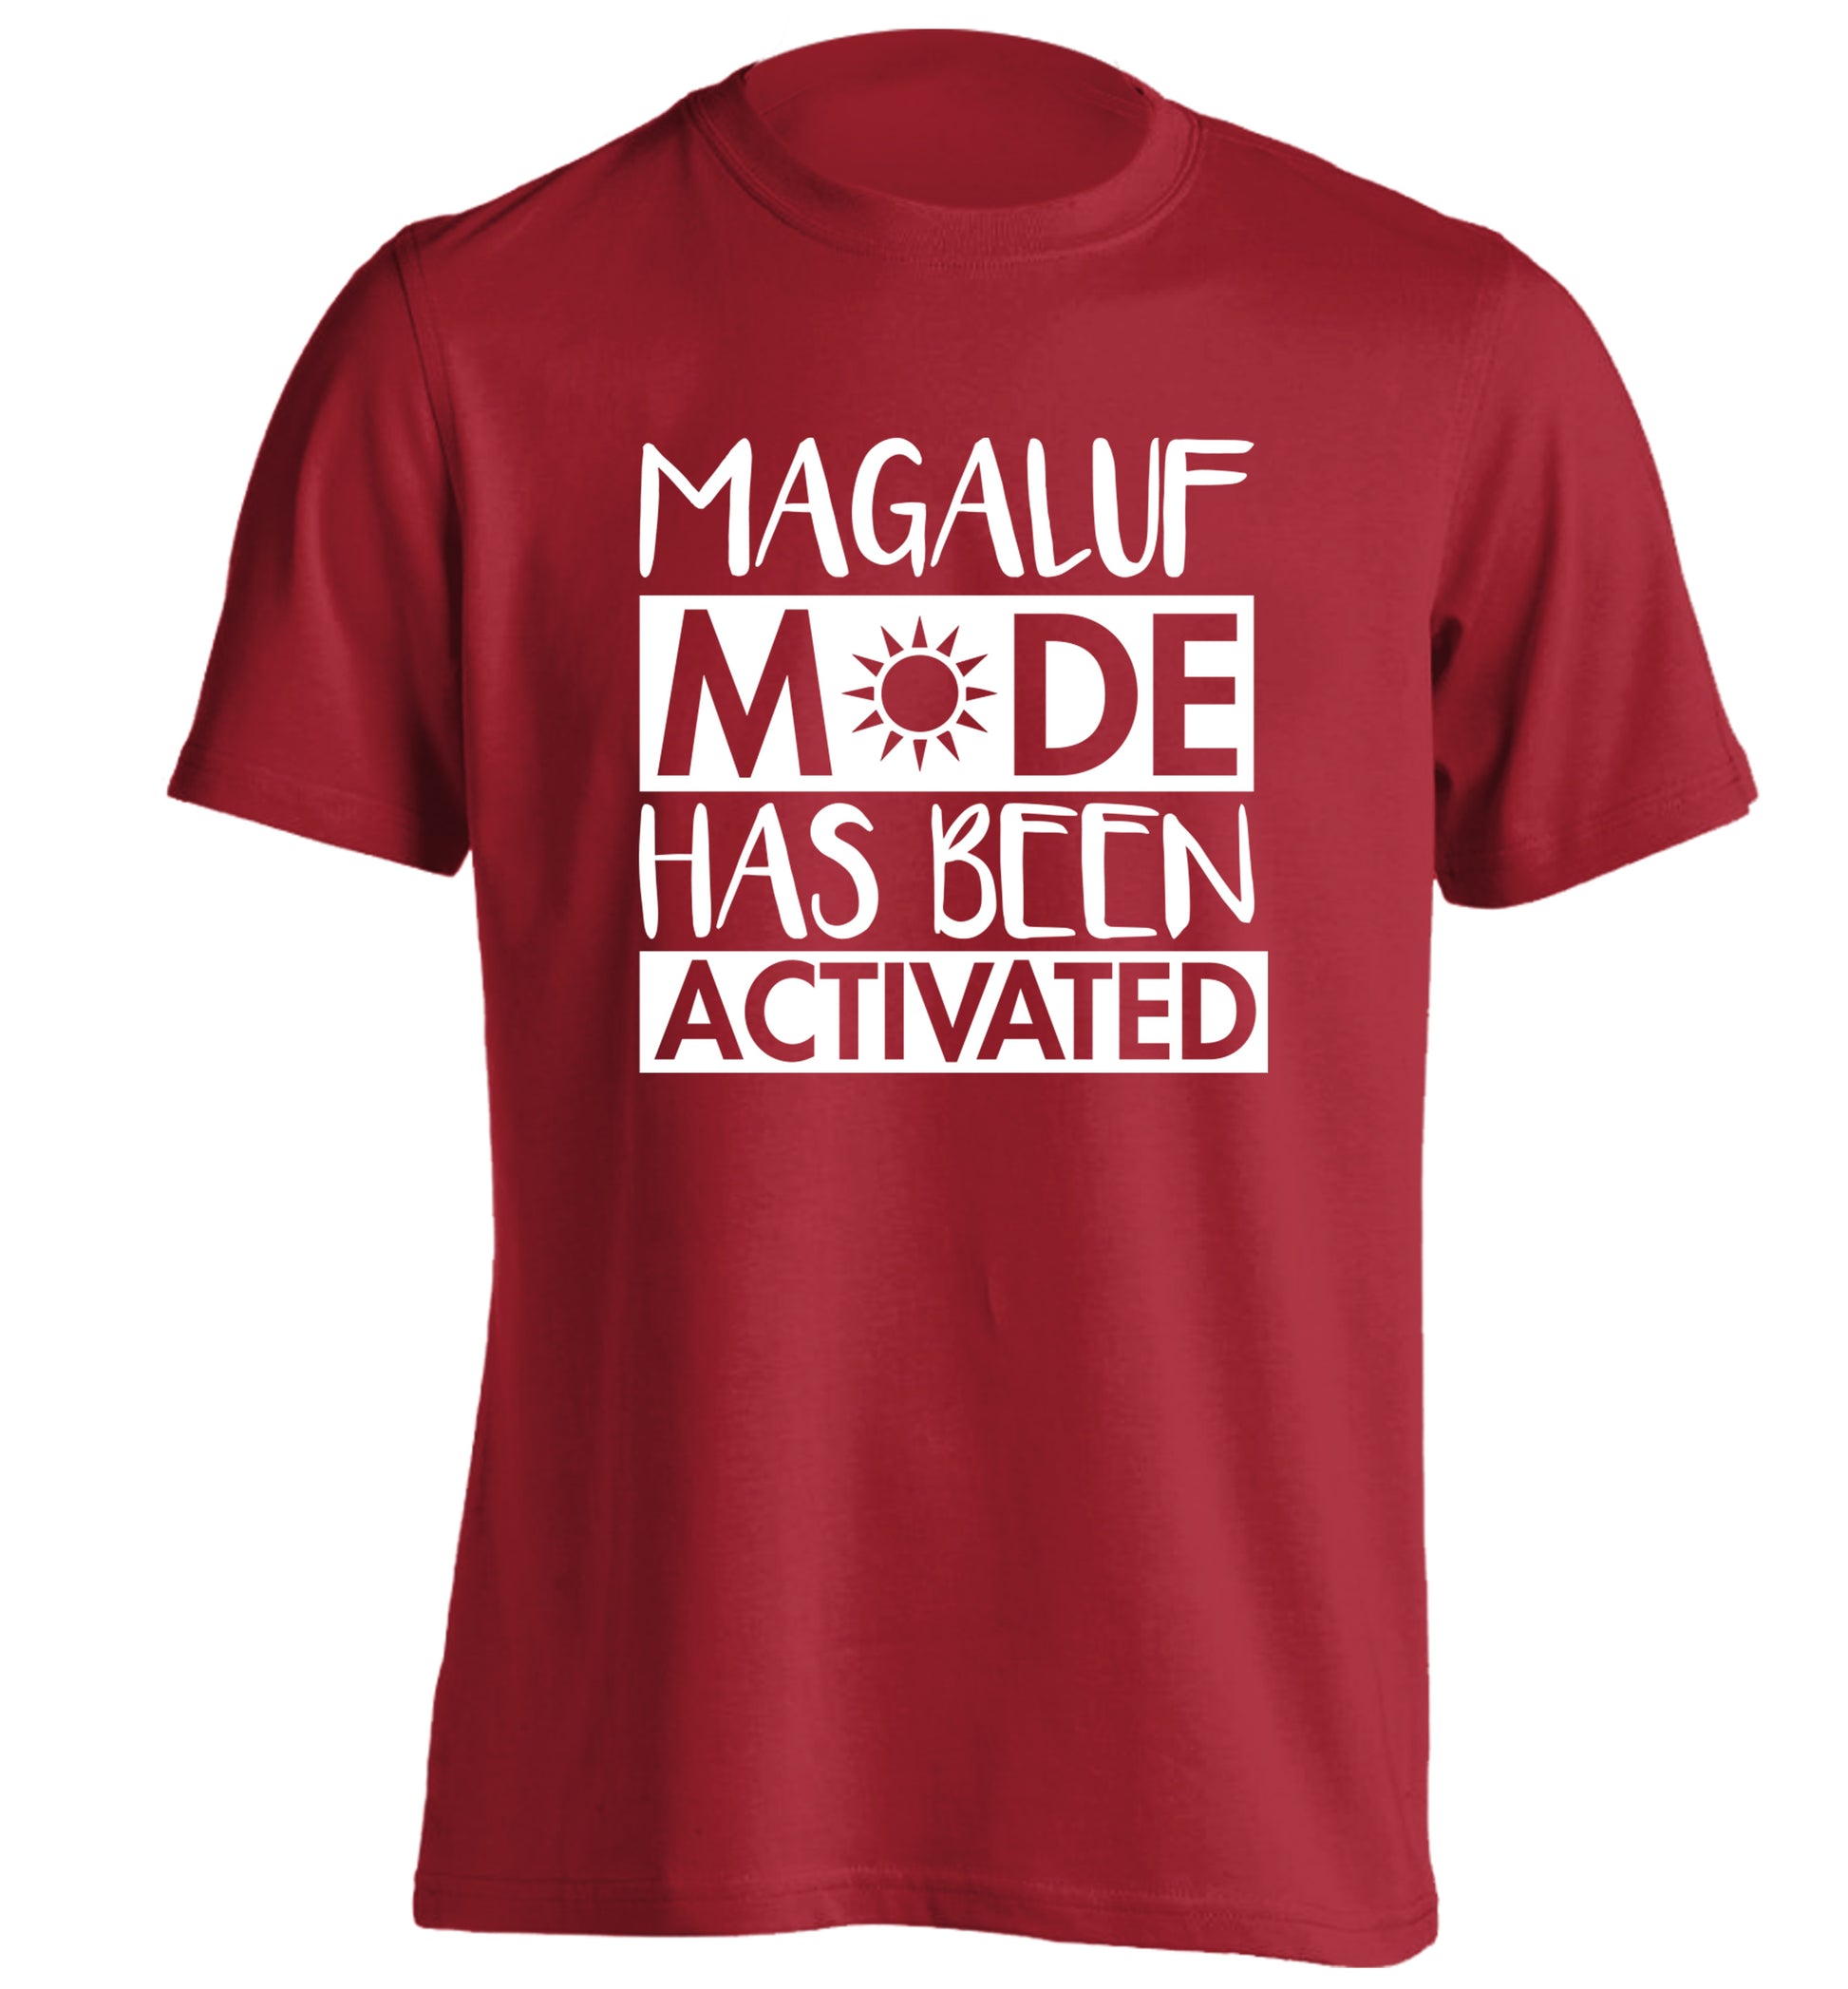 Magaluf mode has been activated adults unisex red Tshirt 2XL